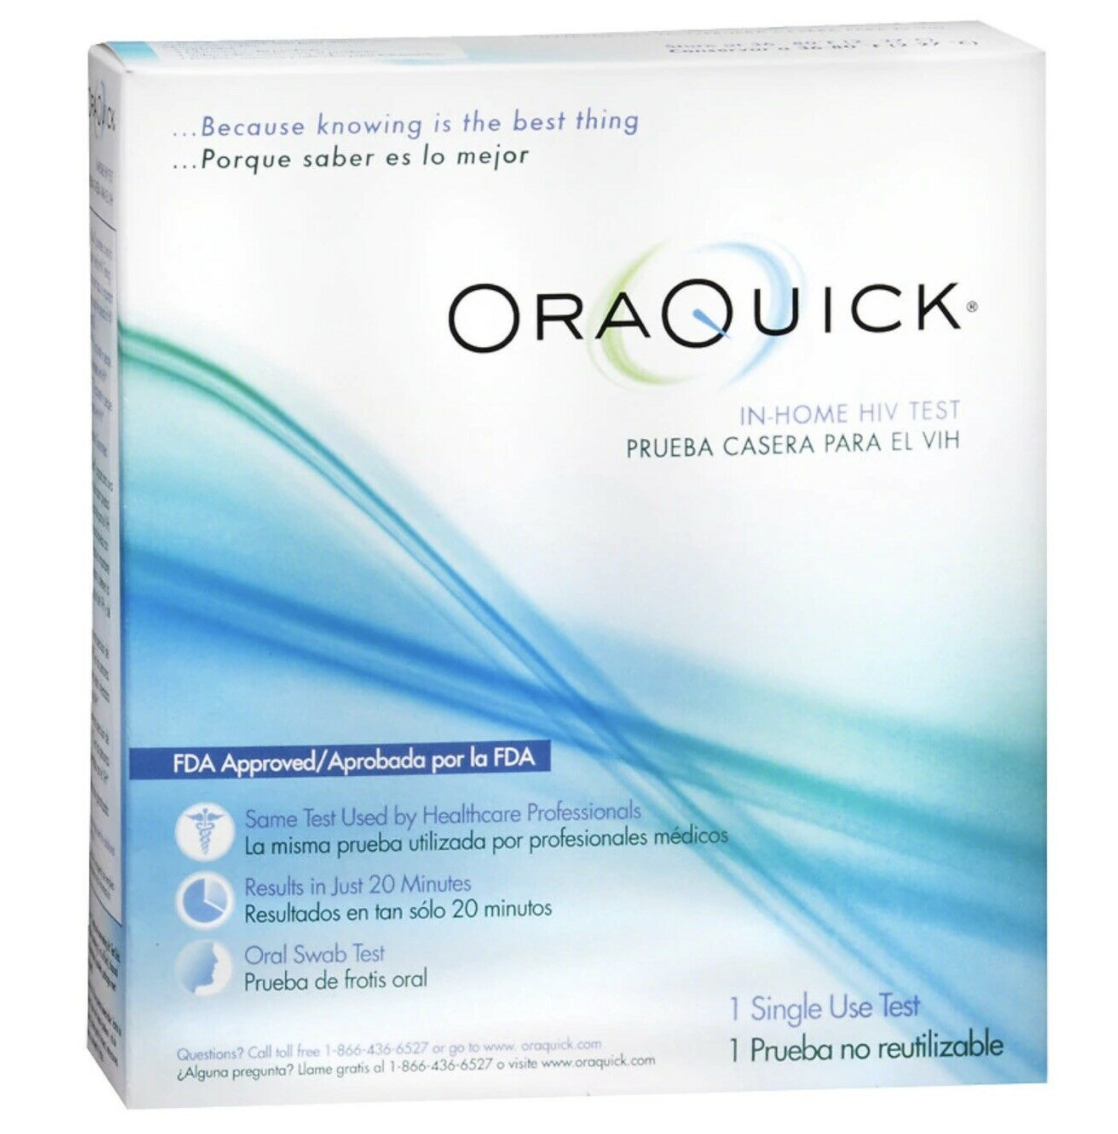 The Human Rights Campaign (HRC) Foundation is distributing HIV testing kits, which include an OraQuick oral swab condoms, lubricants and a test information card. (Credit: OraQuick)